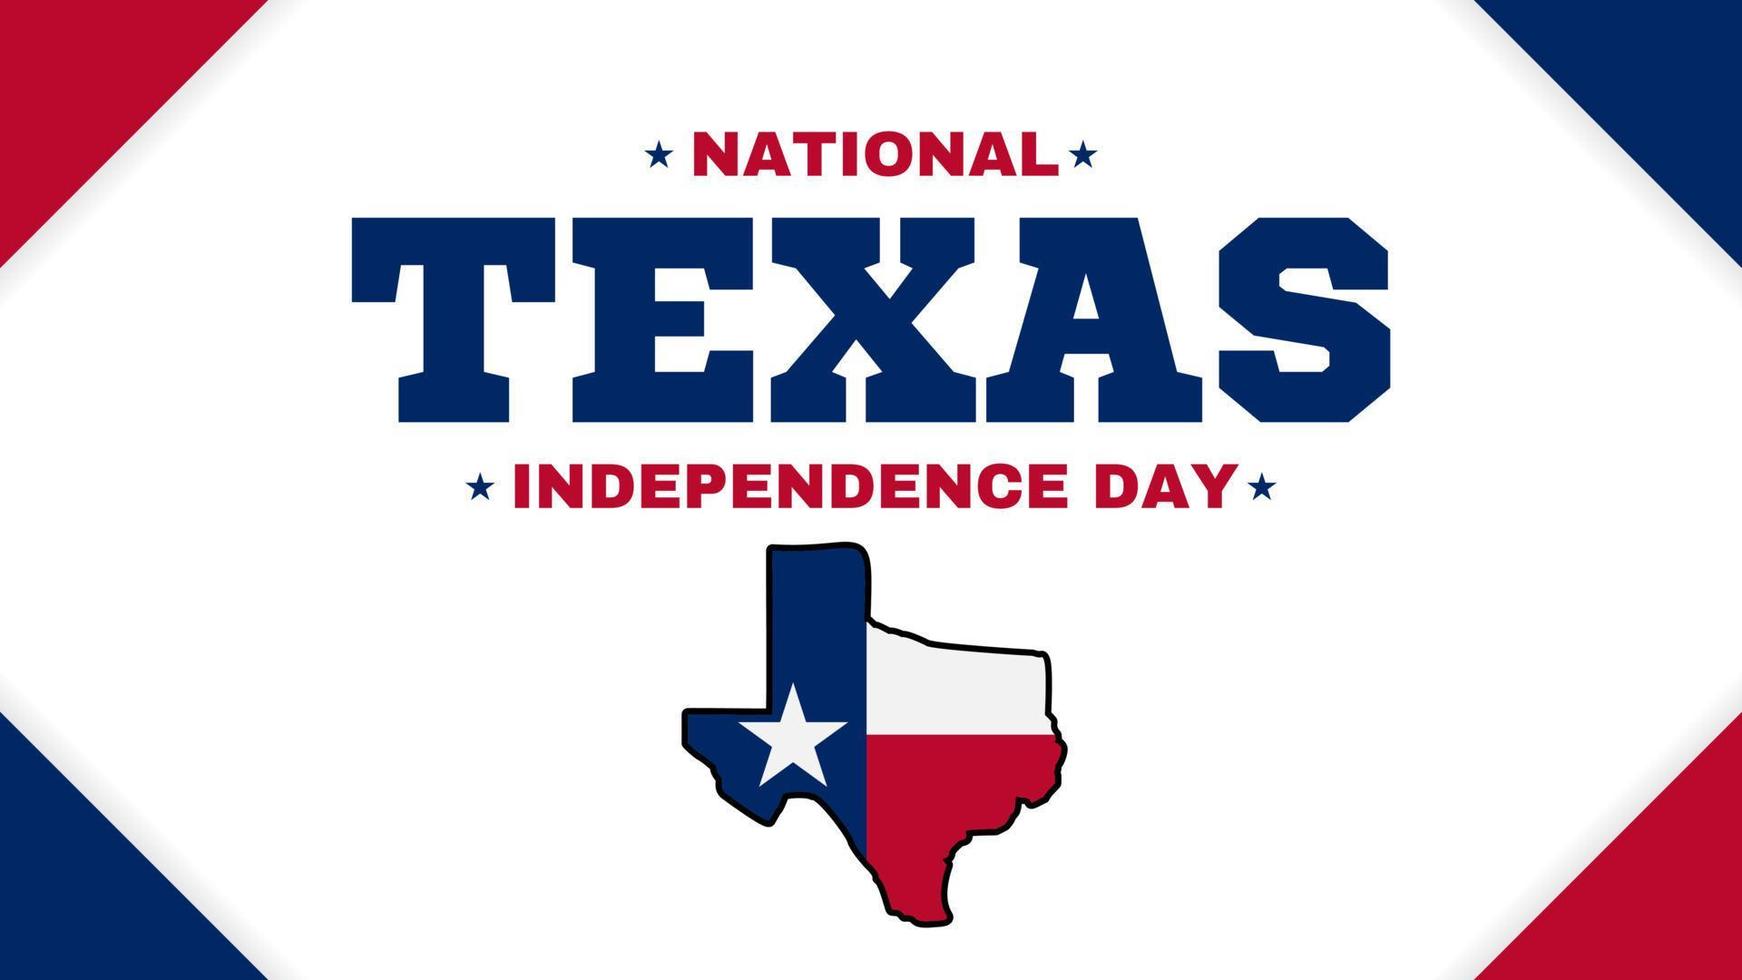 National Texas Independence Day Illustration Banner vector